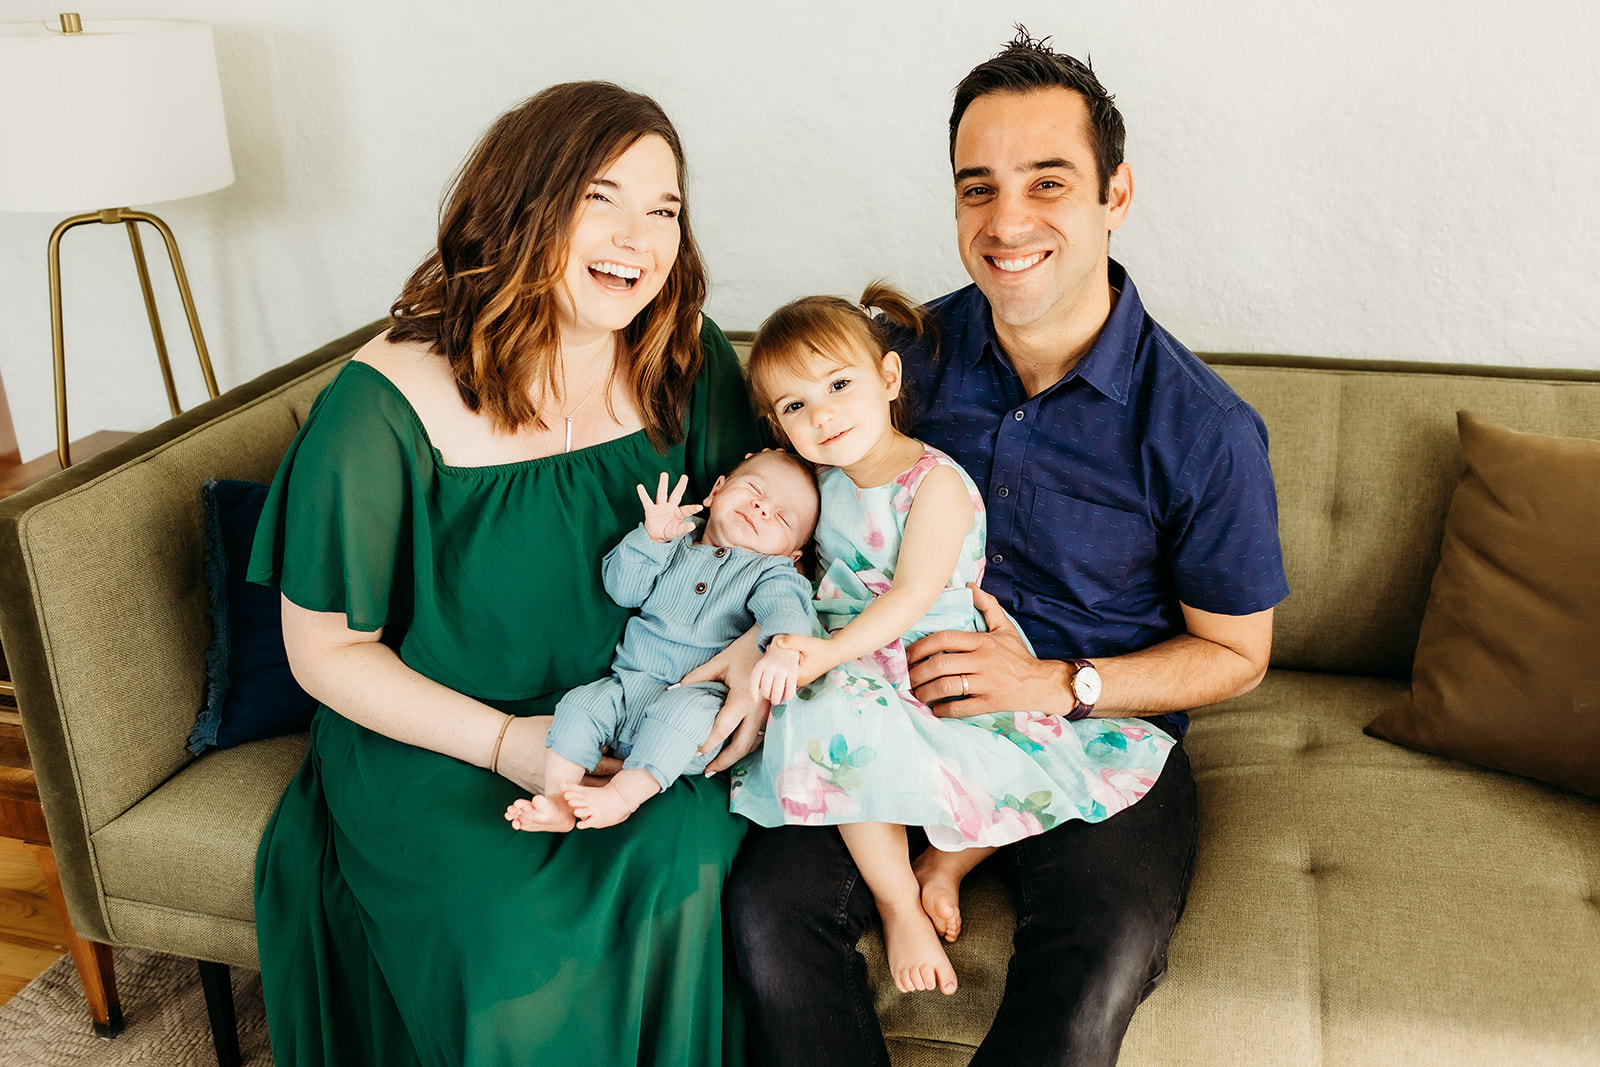 FAQs about Lifestyle In-Home Newborn Photo Sessions